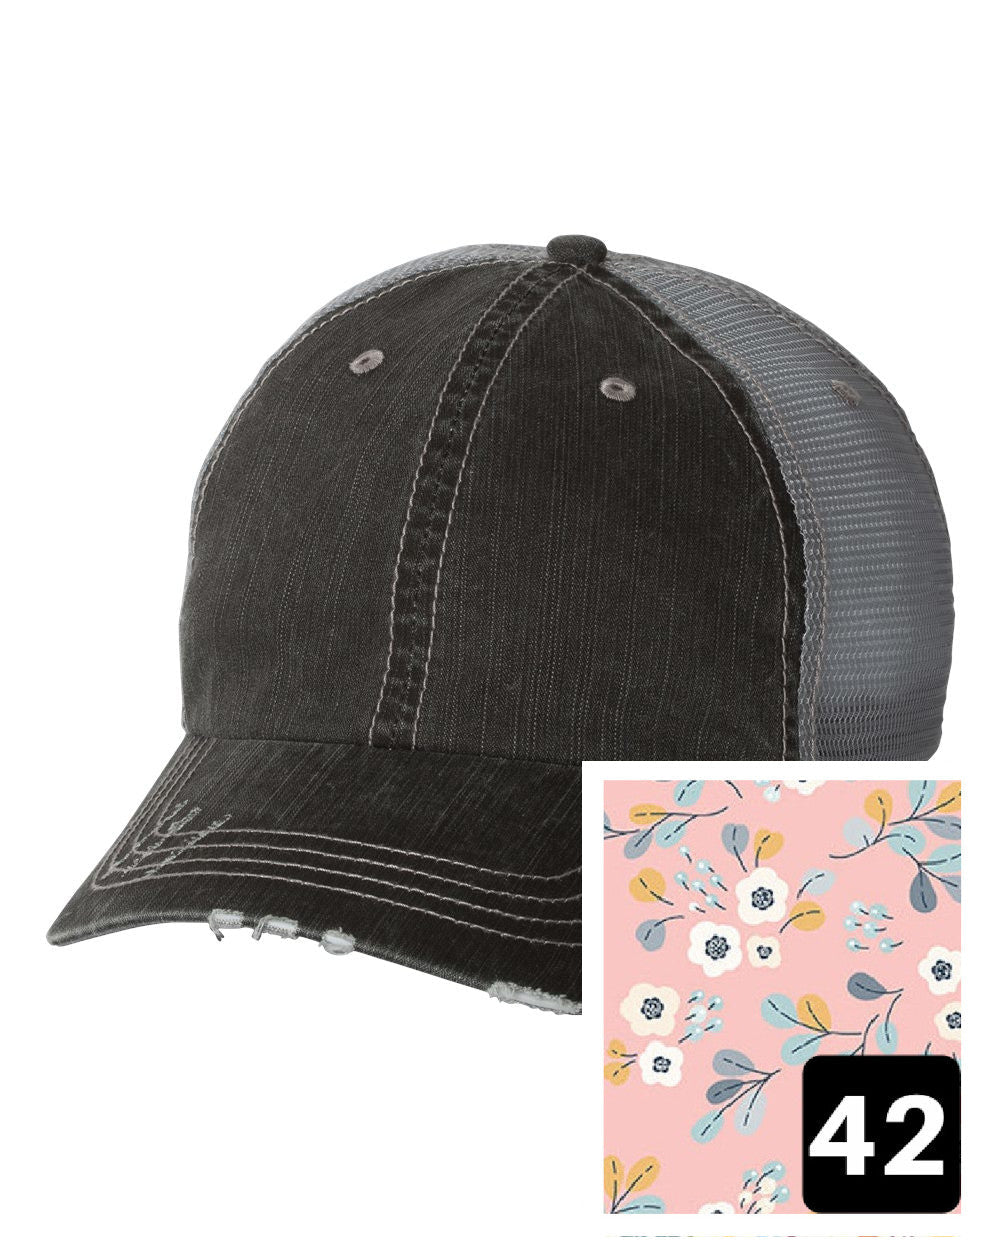 gray distressed trucker hat with light blue and pink mosaic fabric state of North Carolina